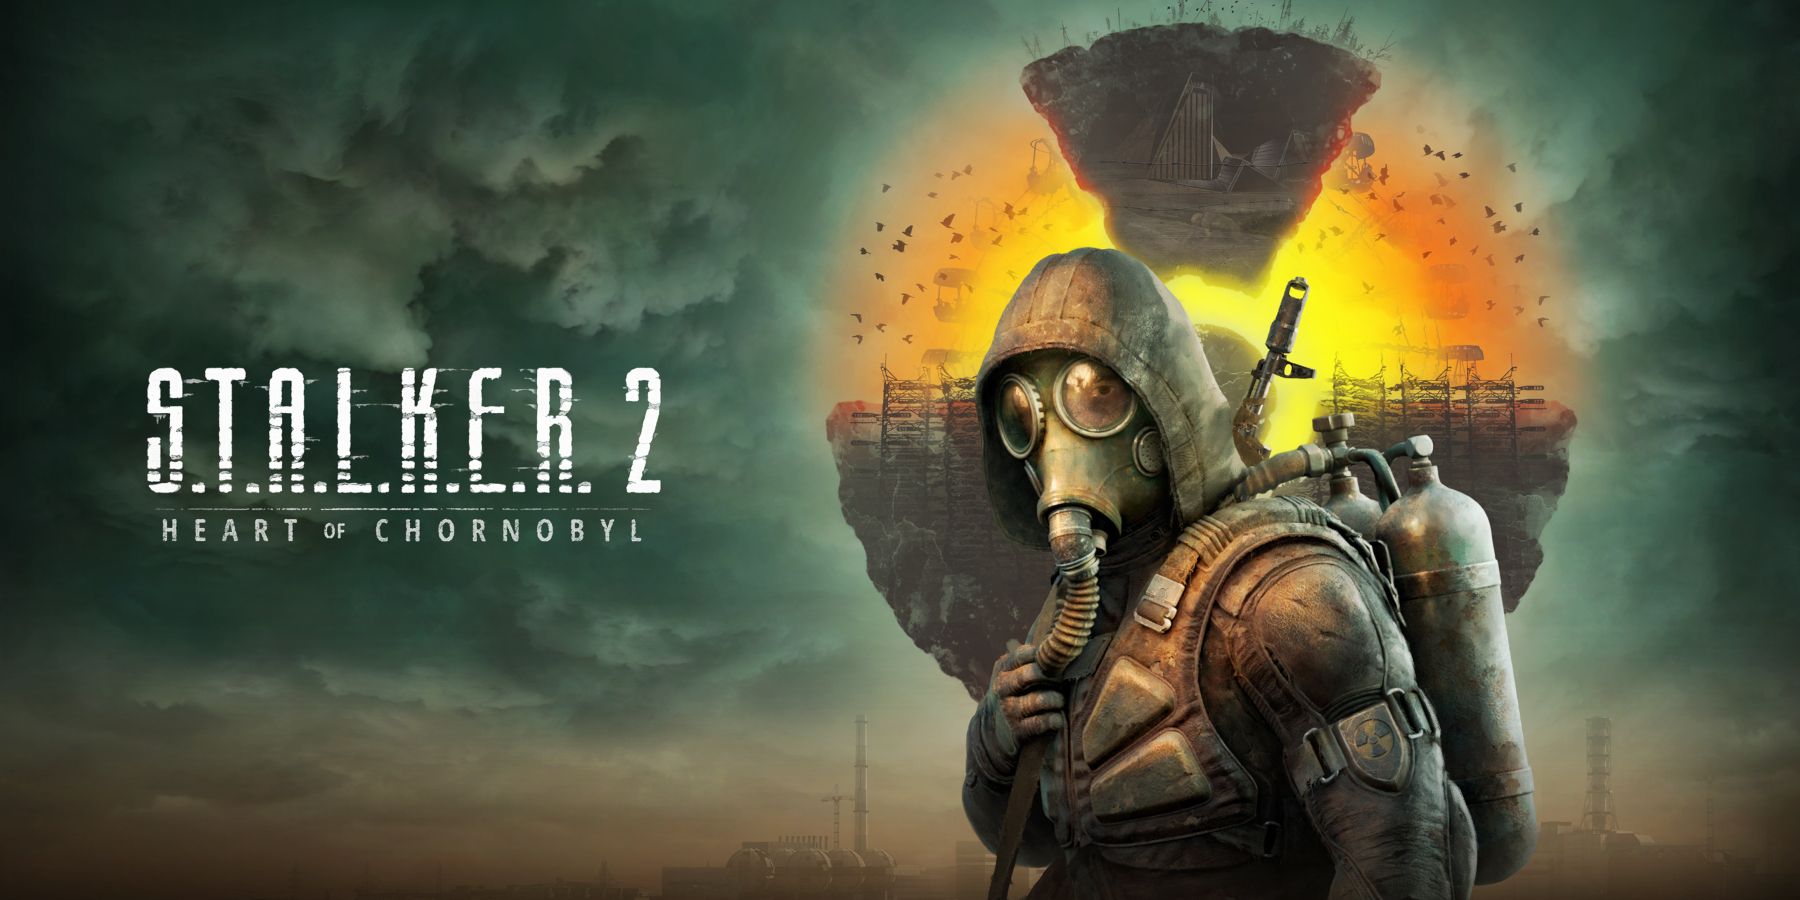 Fresh screenshots of S.T.A.L.K.E.R. 2 have been released. Gaming